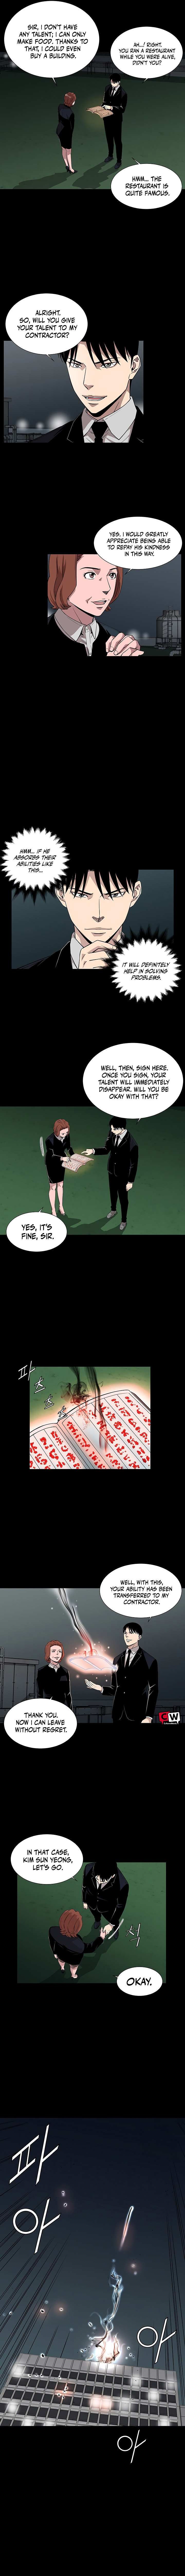 God of Autopsy Chapter 9 page 9